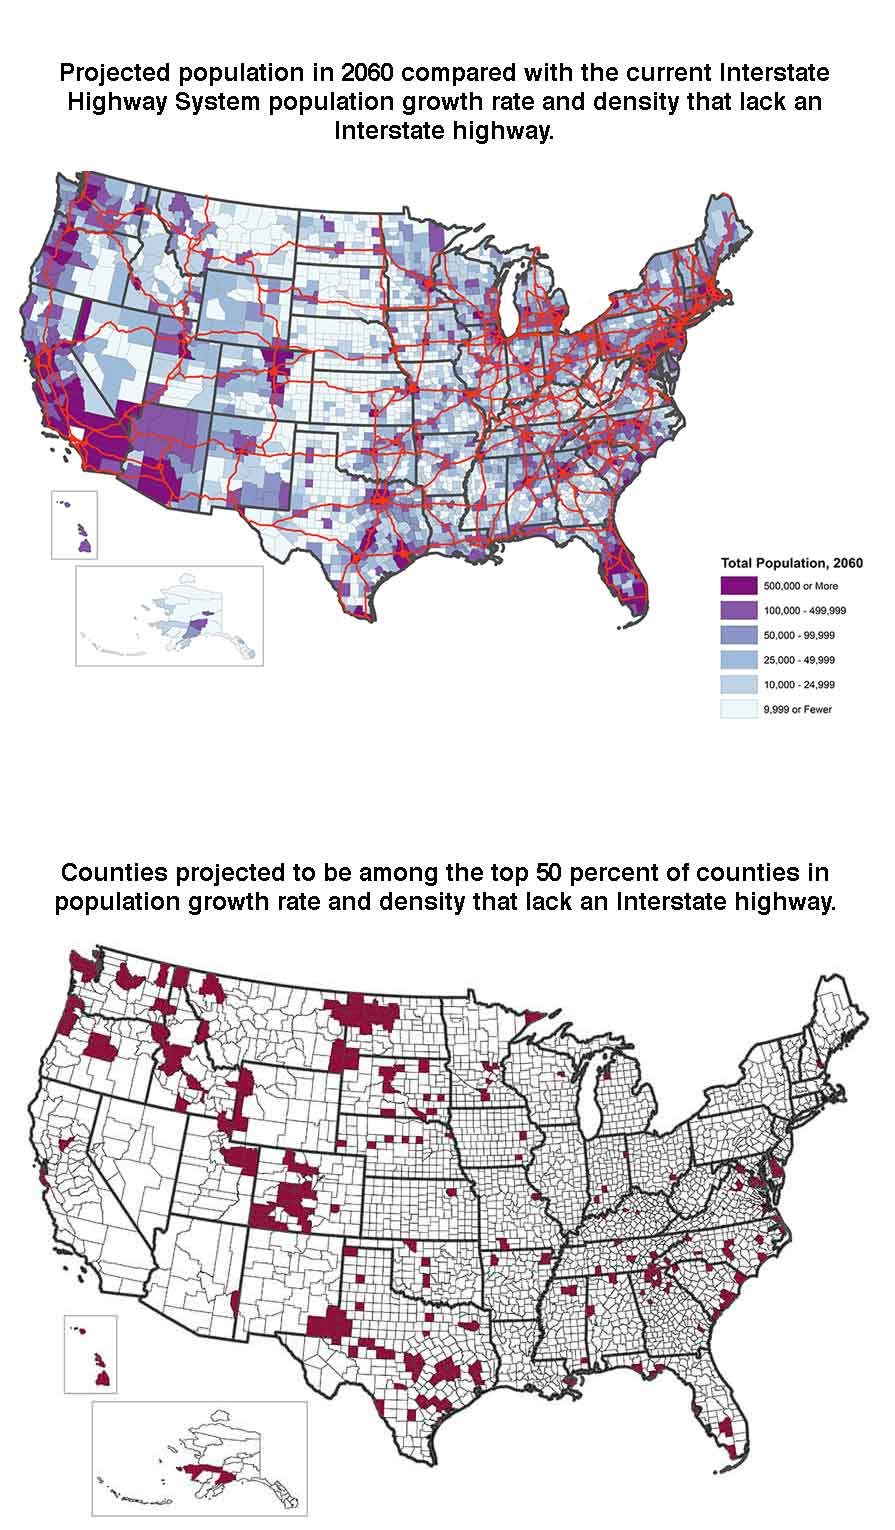 Top Graphic: Map of U.S. projected population in 2060 compared with the current interstate highway system population growth rate and density that lack an interstate highway system. Bottom Graphic: U.S. map of counties projected to be among the top 50 percent of counties in population growth rate and density that lack an interstate highway.